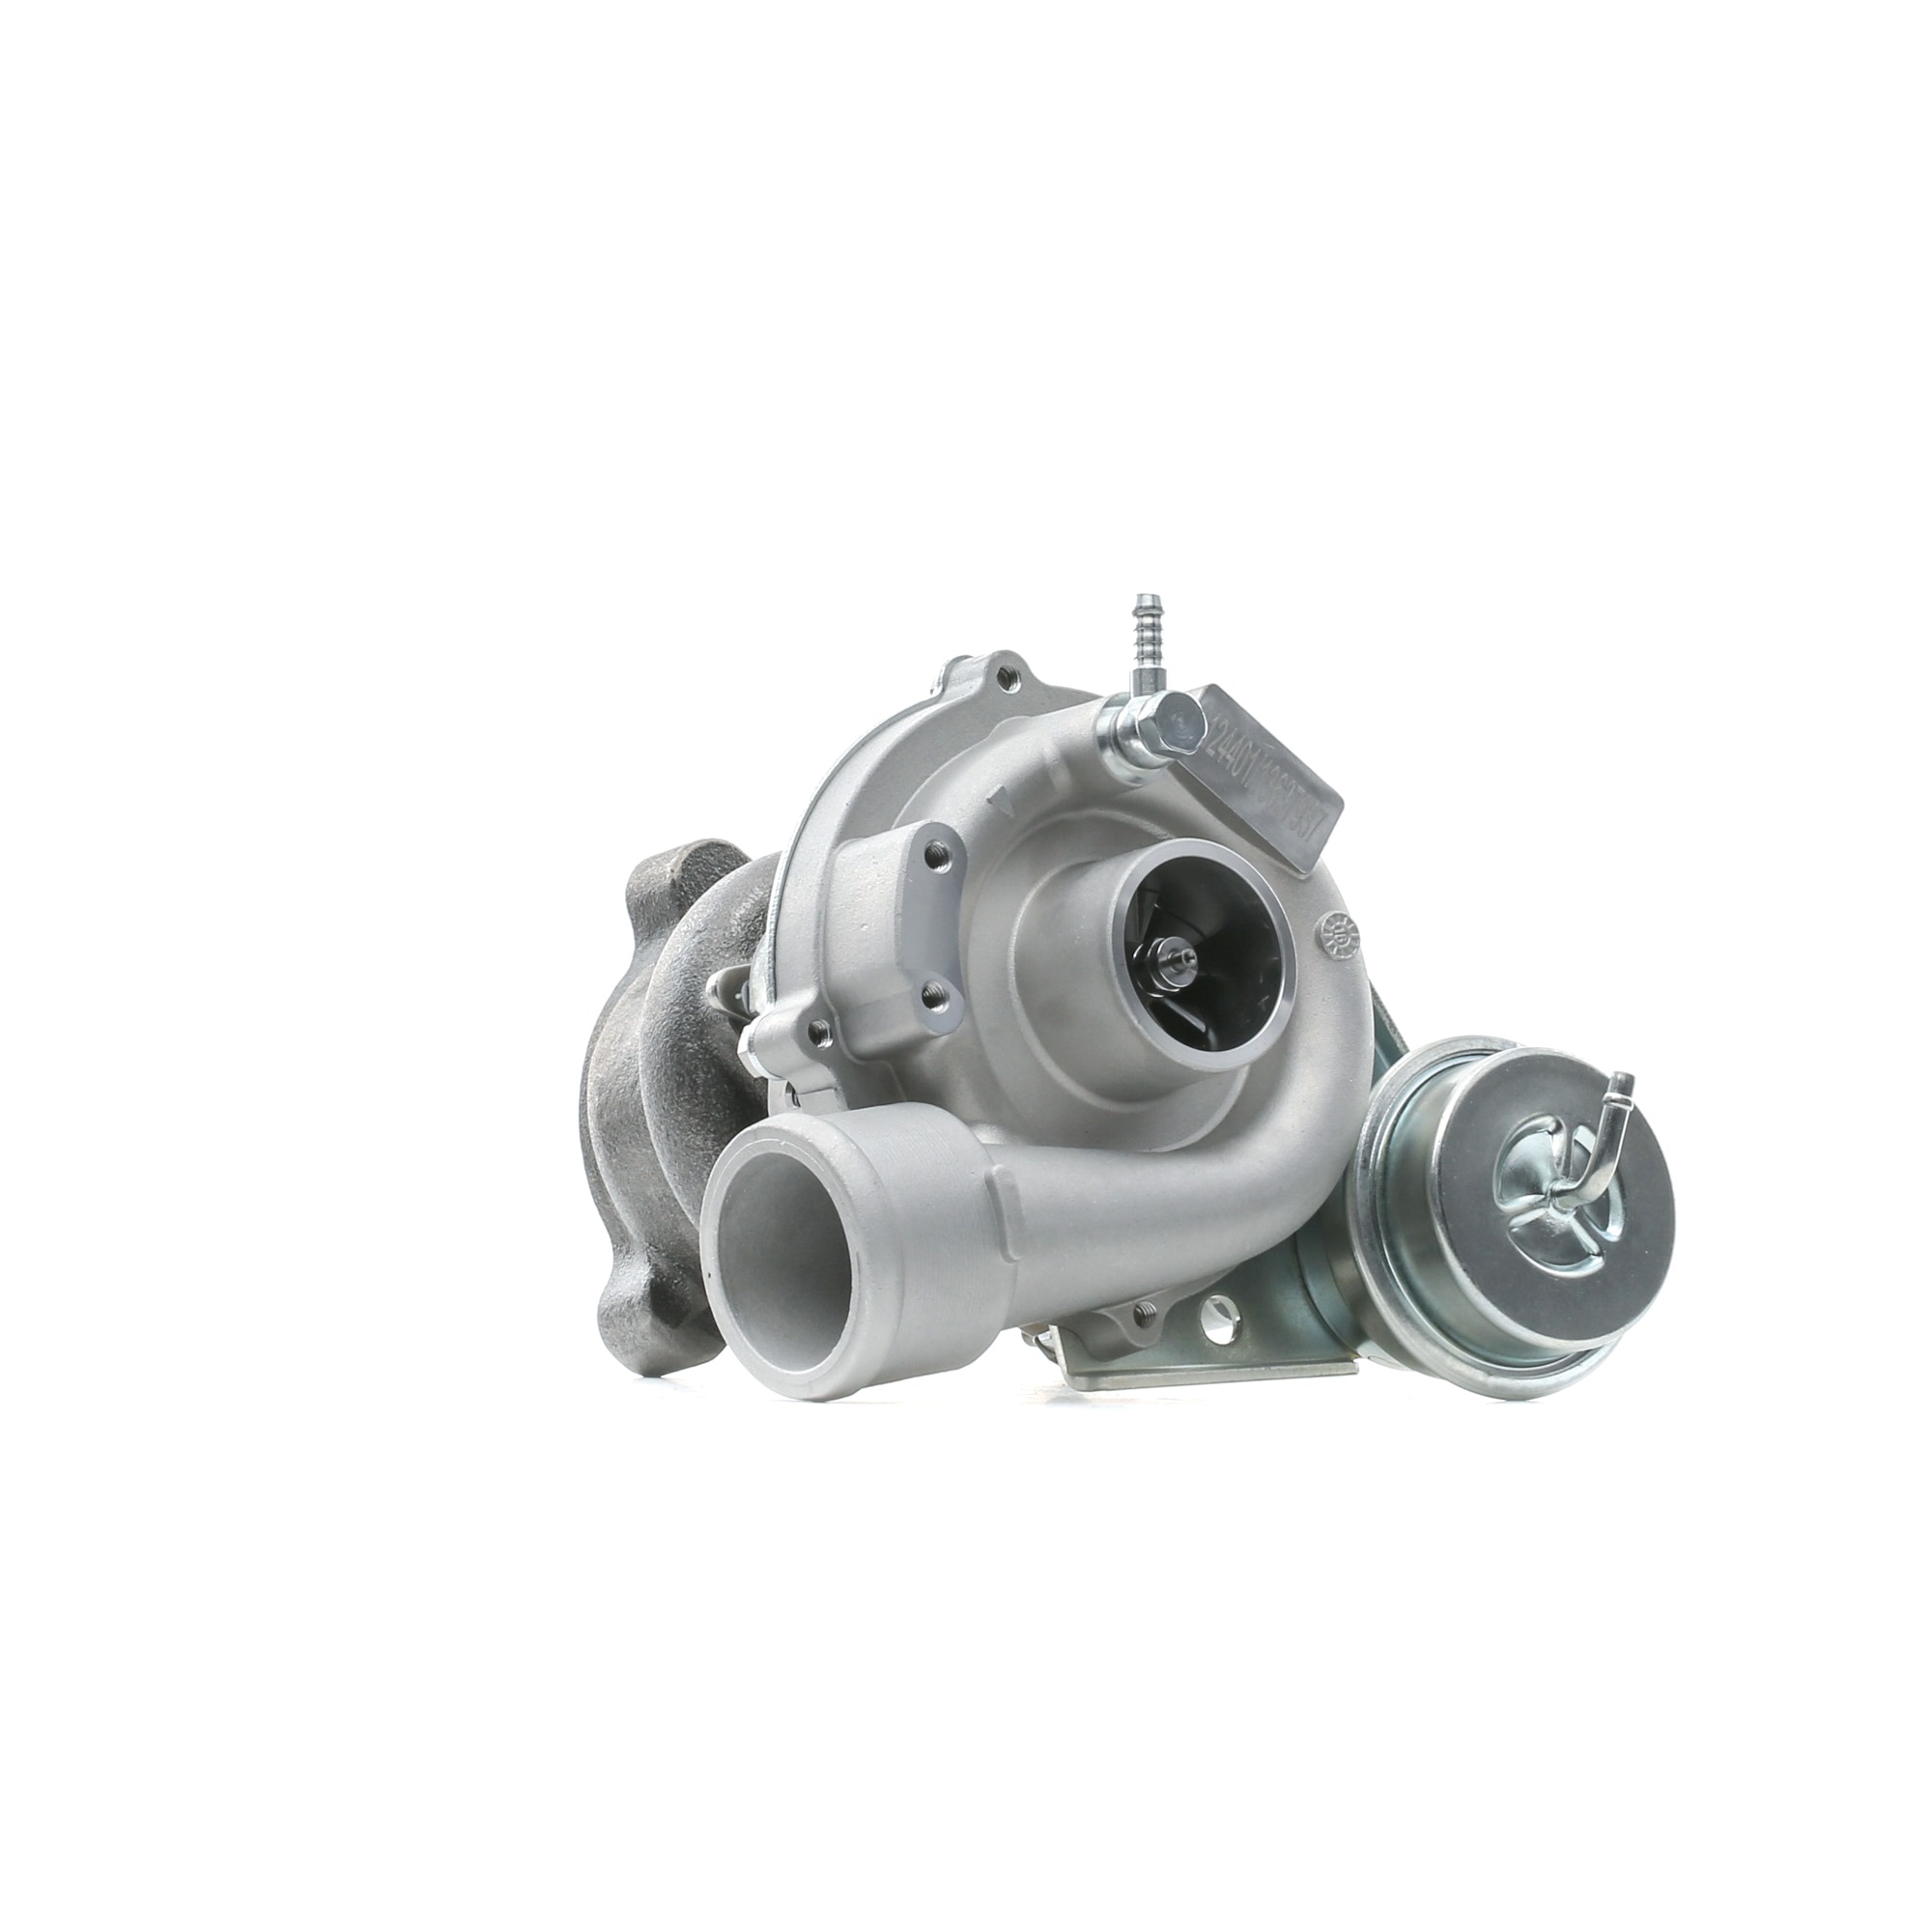 STARK SKCT-1190163 Turbocharger Exhaust Turbocharger, Pneumatic, Incl. Gasket Set, with attachment material